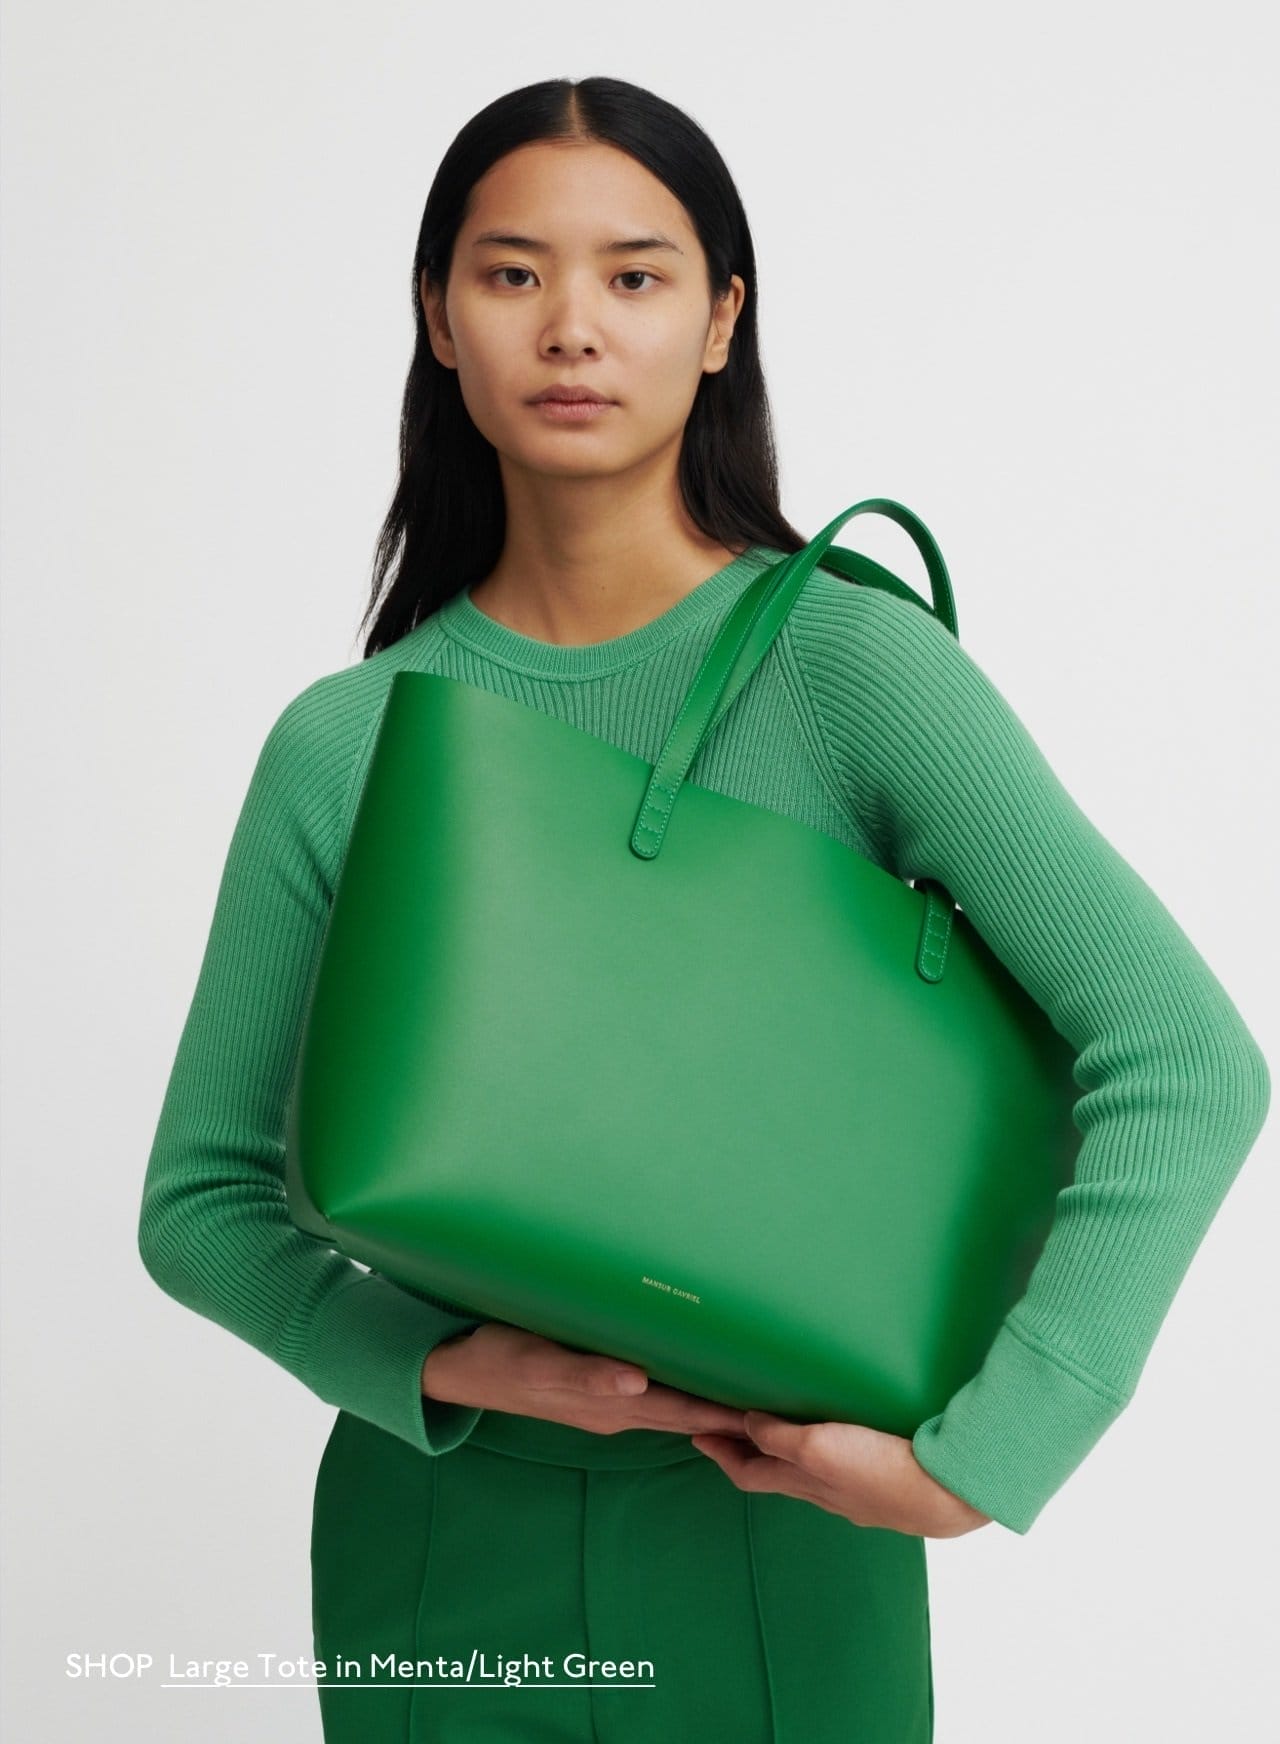 Shop the Large Tote in Menta/Light Green.